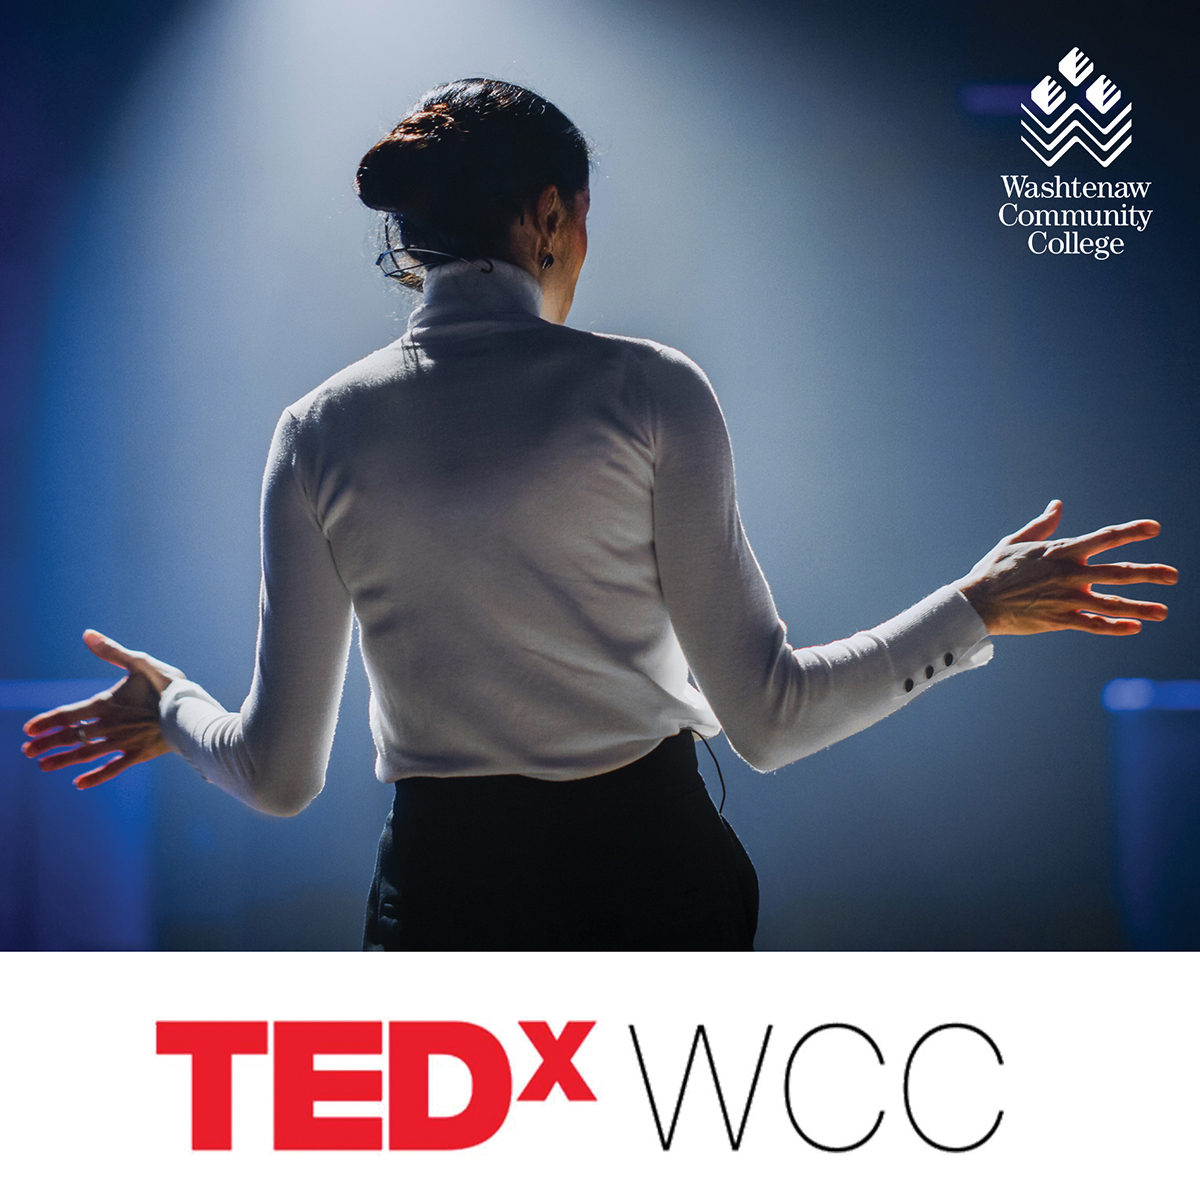 Students' effort leads to TEDxWCC event in Towsley Auditorium on April 6